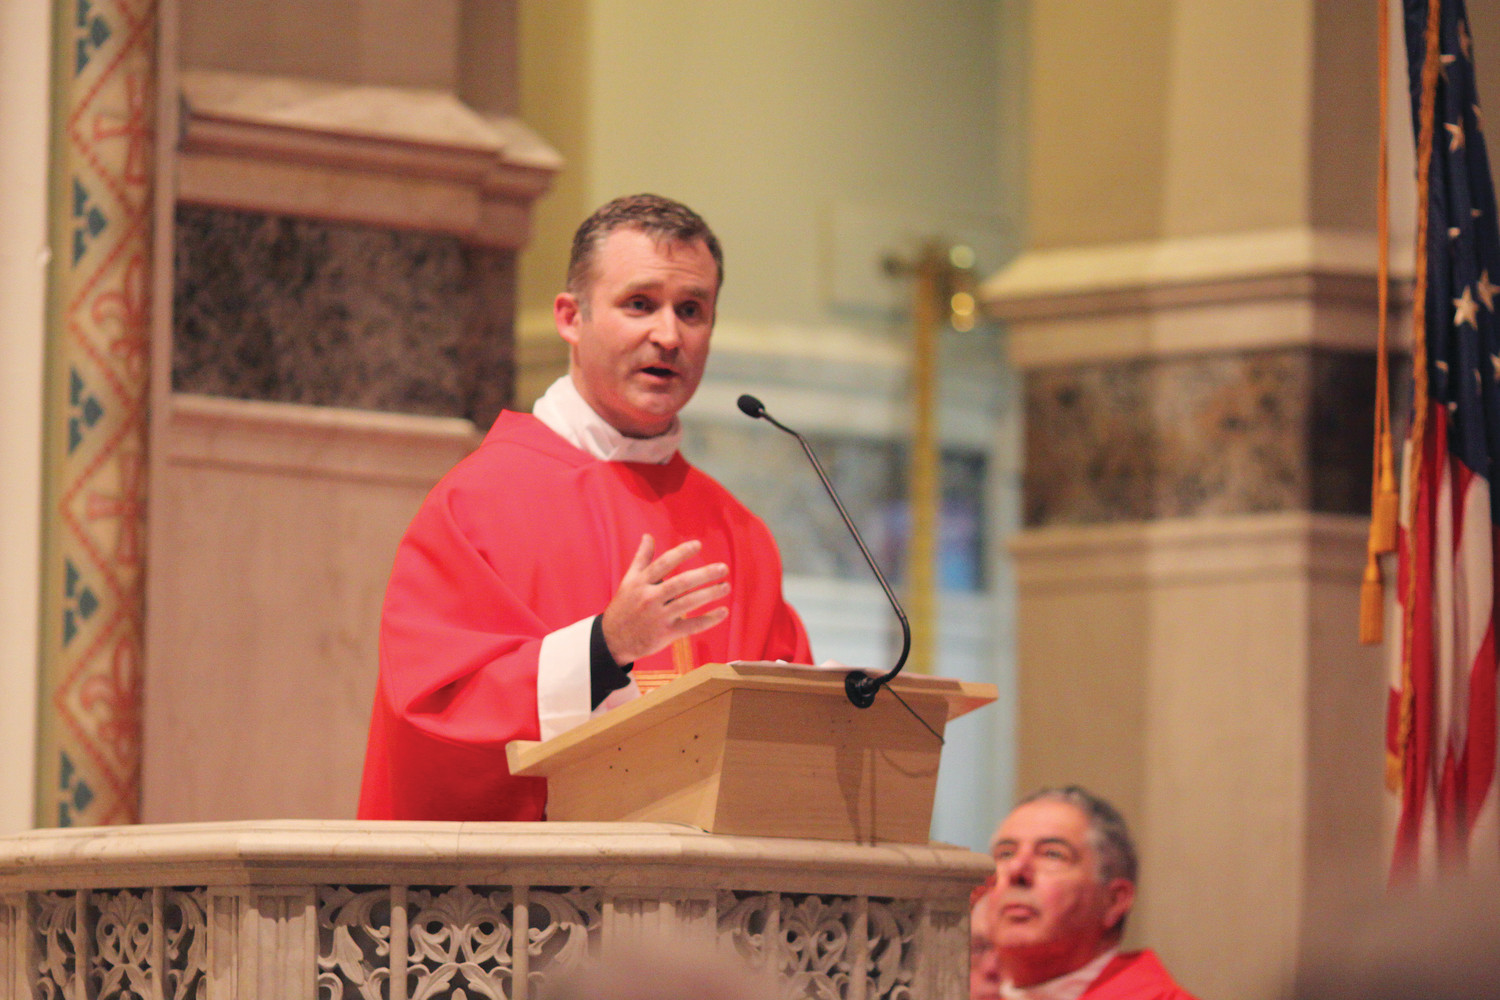 Father John Connaughton, director of vocations for the Diocese of Bridgeport and a member of the Connecticut Bar, served as homilist at last week’s Red Mass.